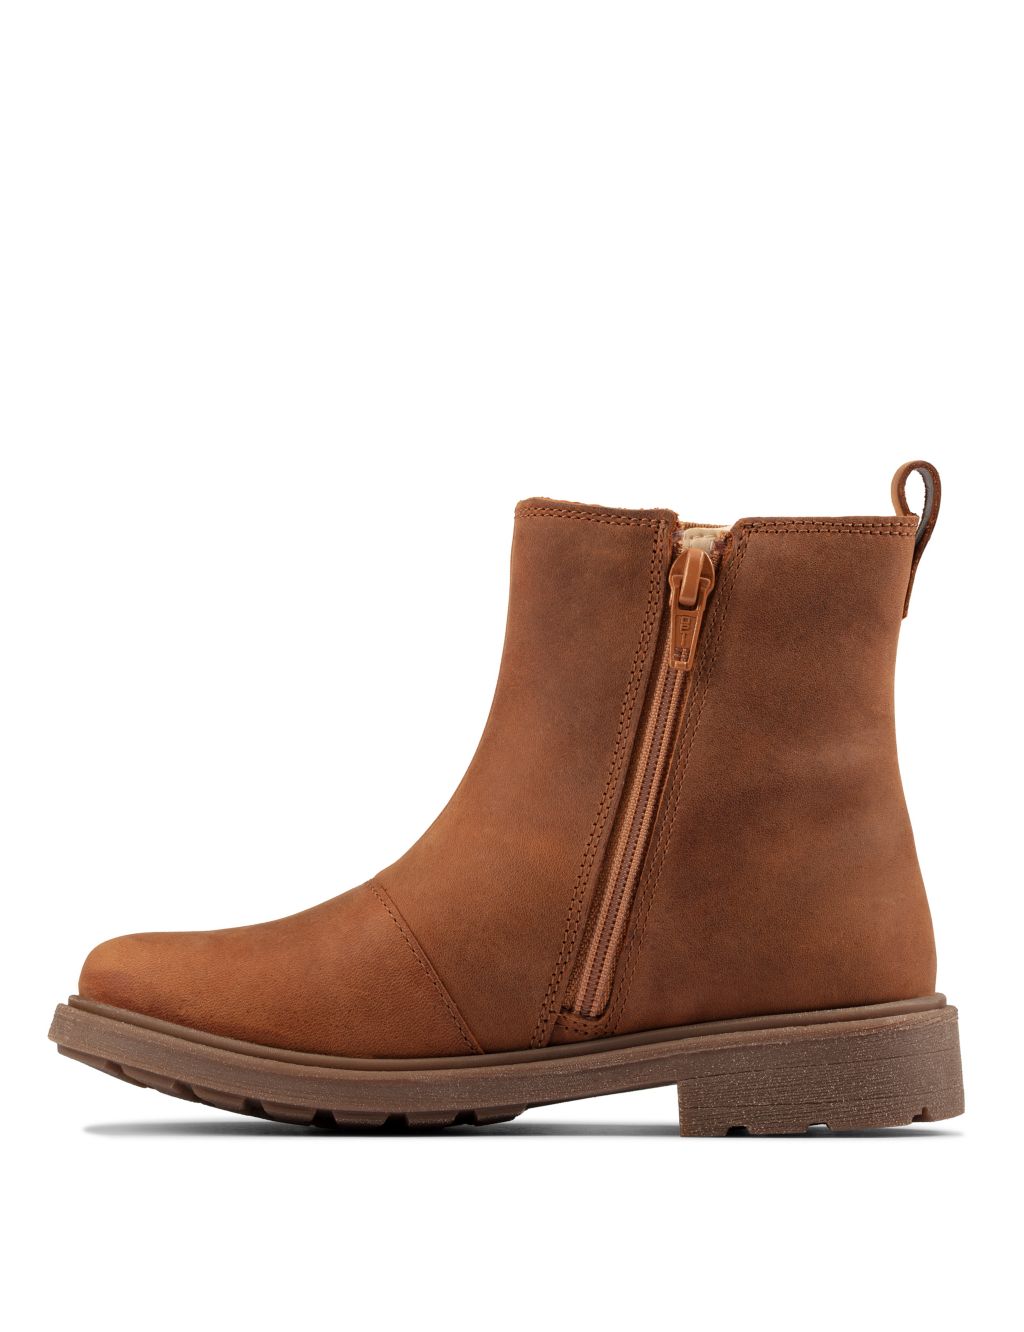 Kids' Leather Chelsea Boots image 5